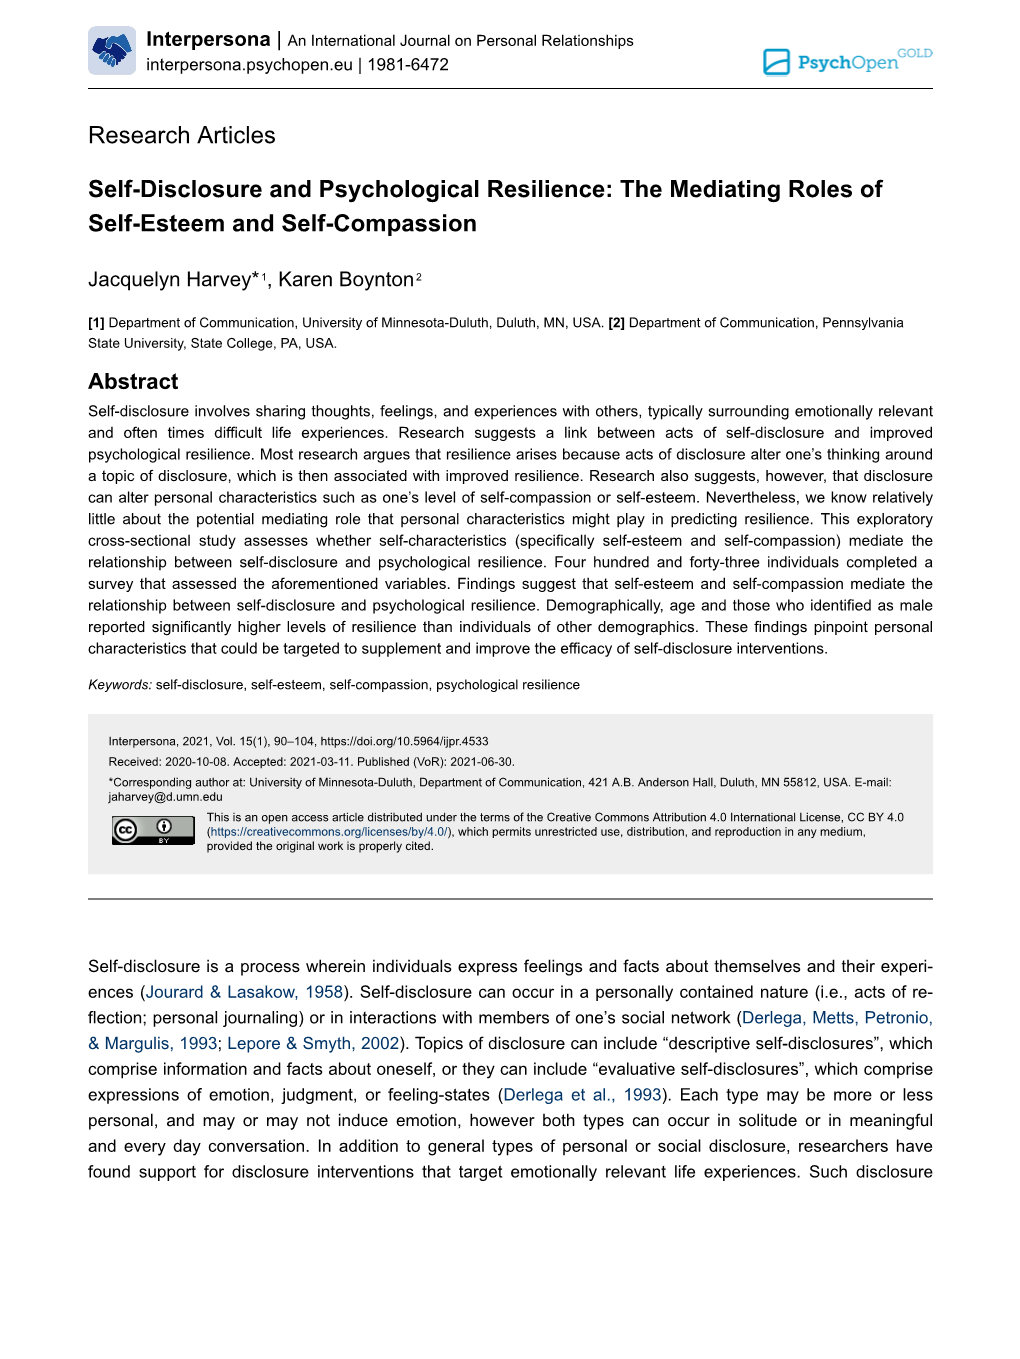 Self-Disclosure and Psychological Resilience: the Mediating Roles of Self-Esteem and Self-Compassion